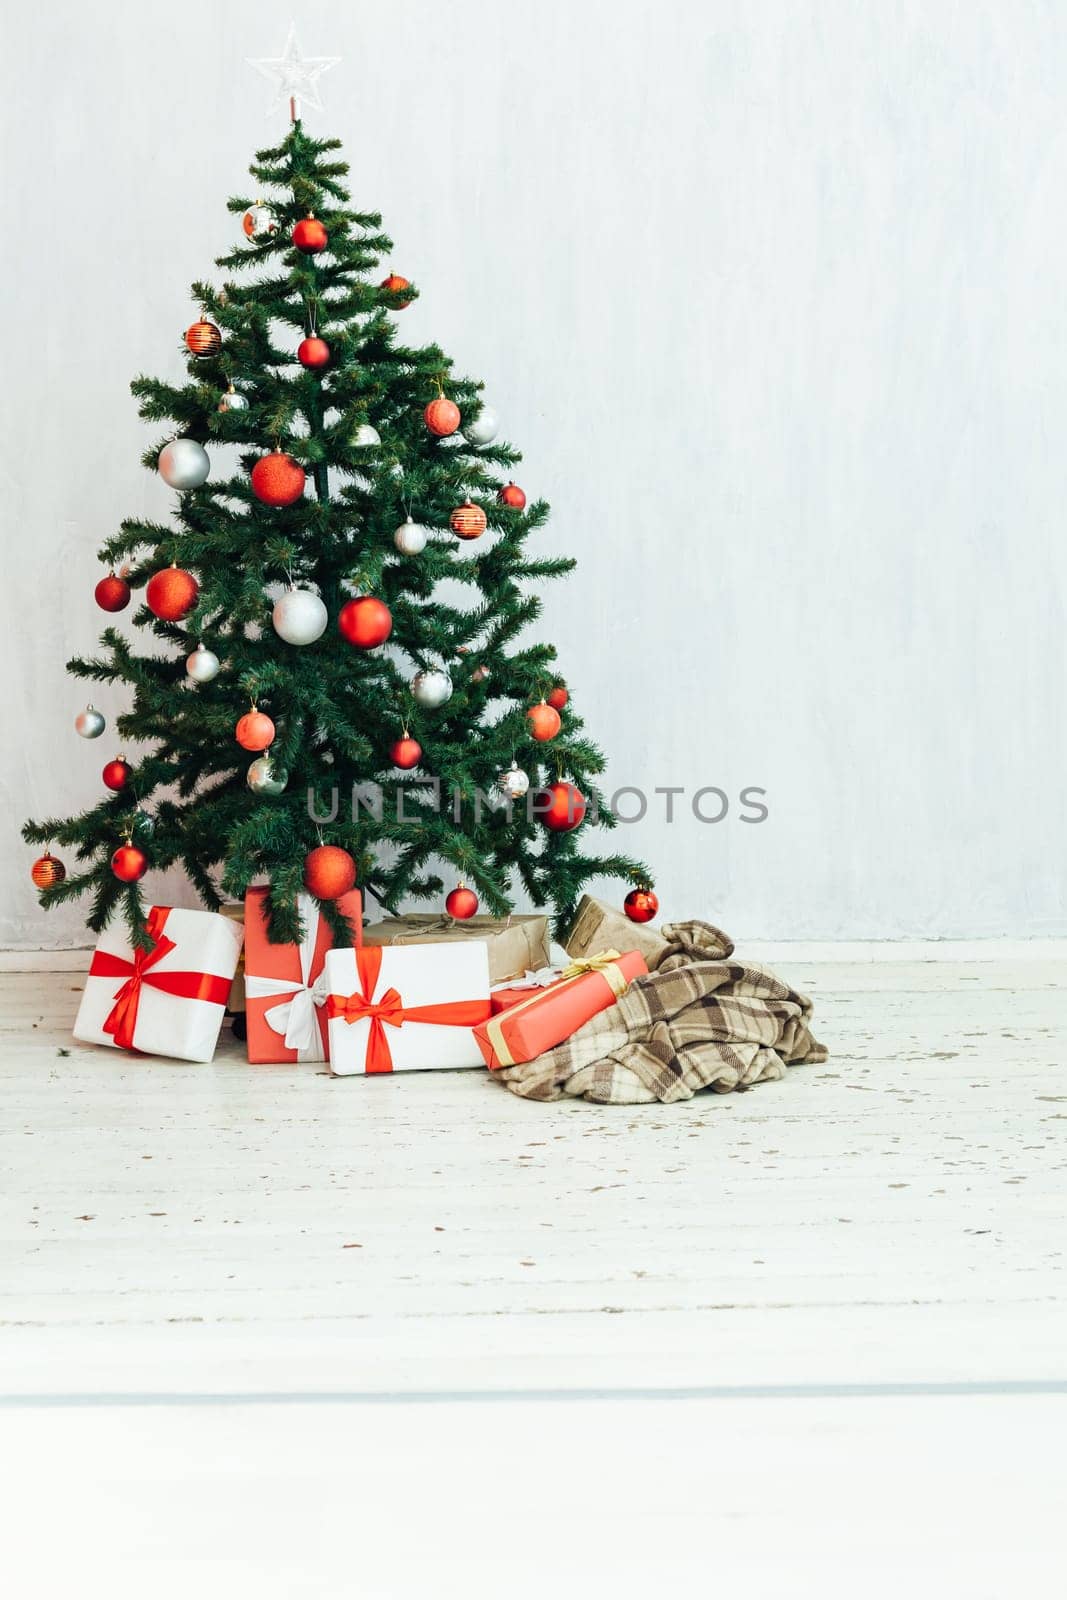 Christmas tree gifts winter background holiday